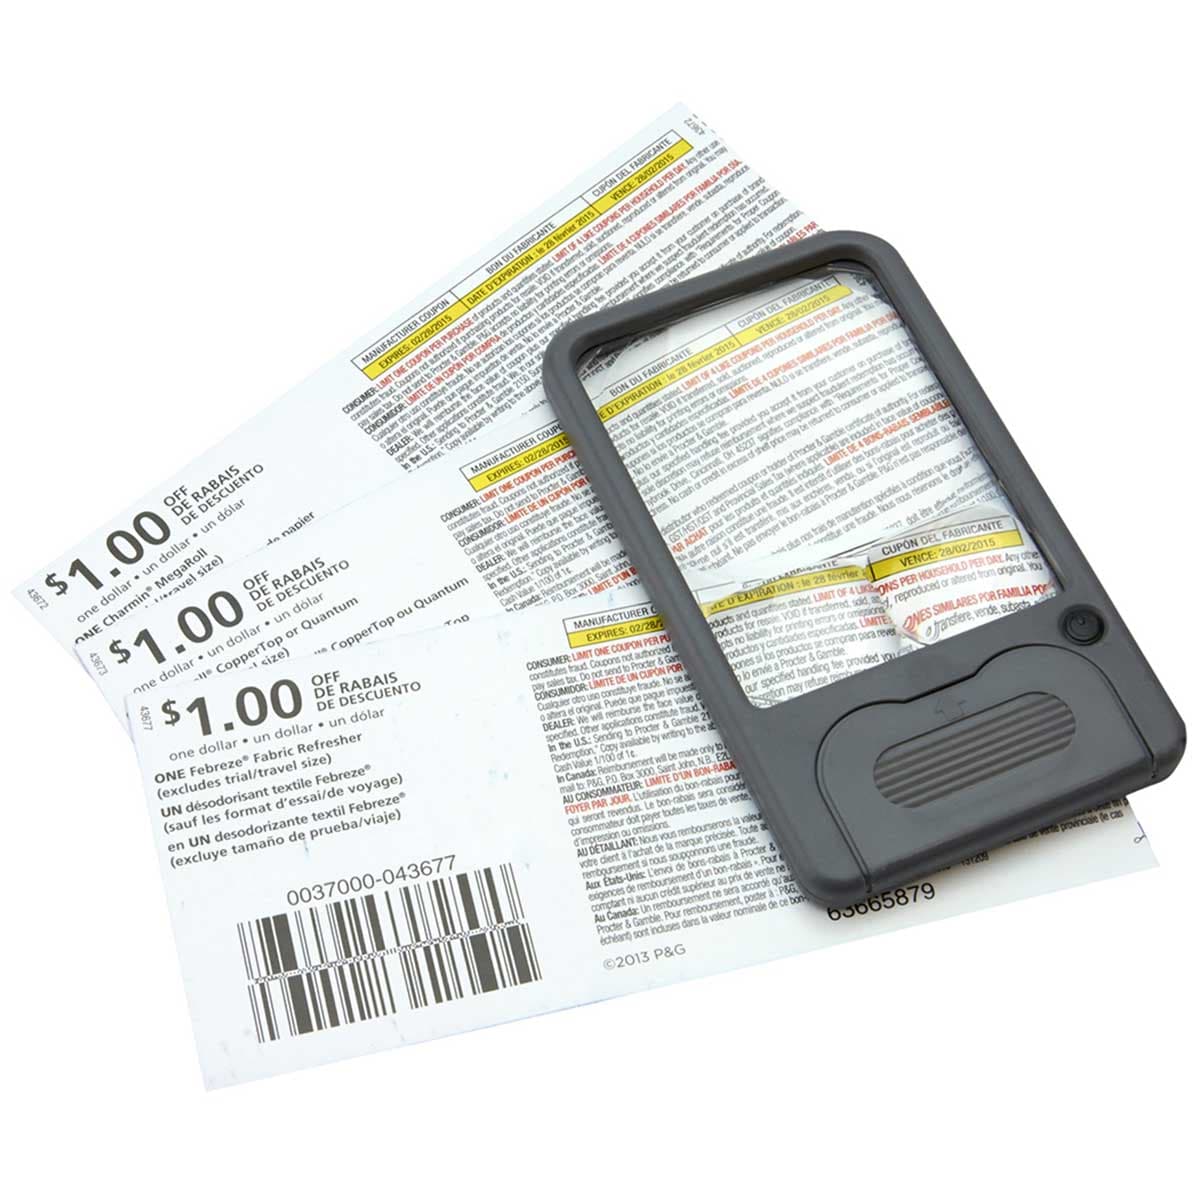 Лупа Carson Multi-Power LED Lighted Pocket Magnifier 2,5x / 4,5x / 6x